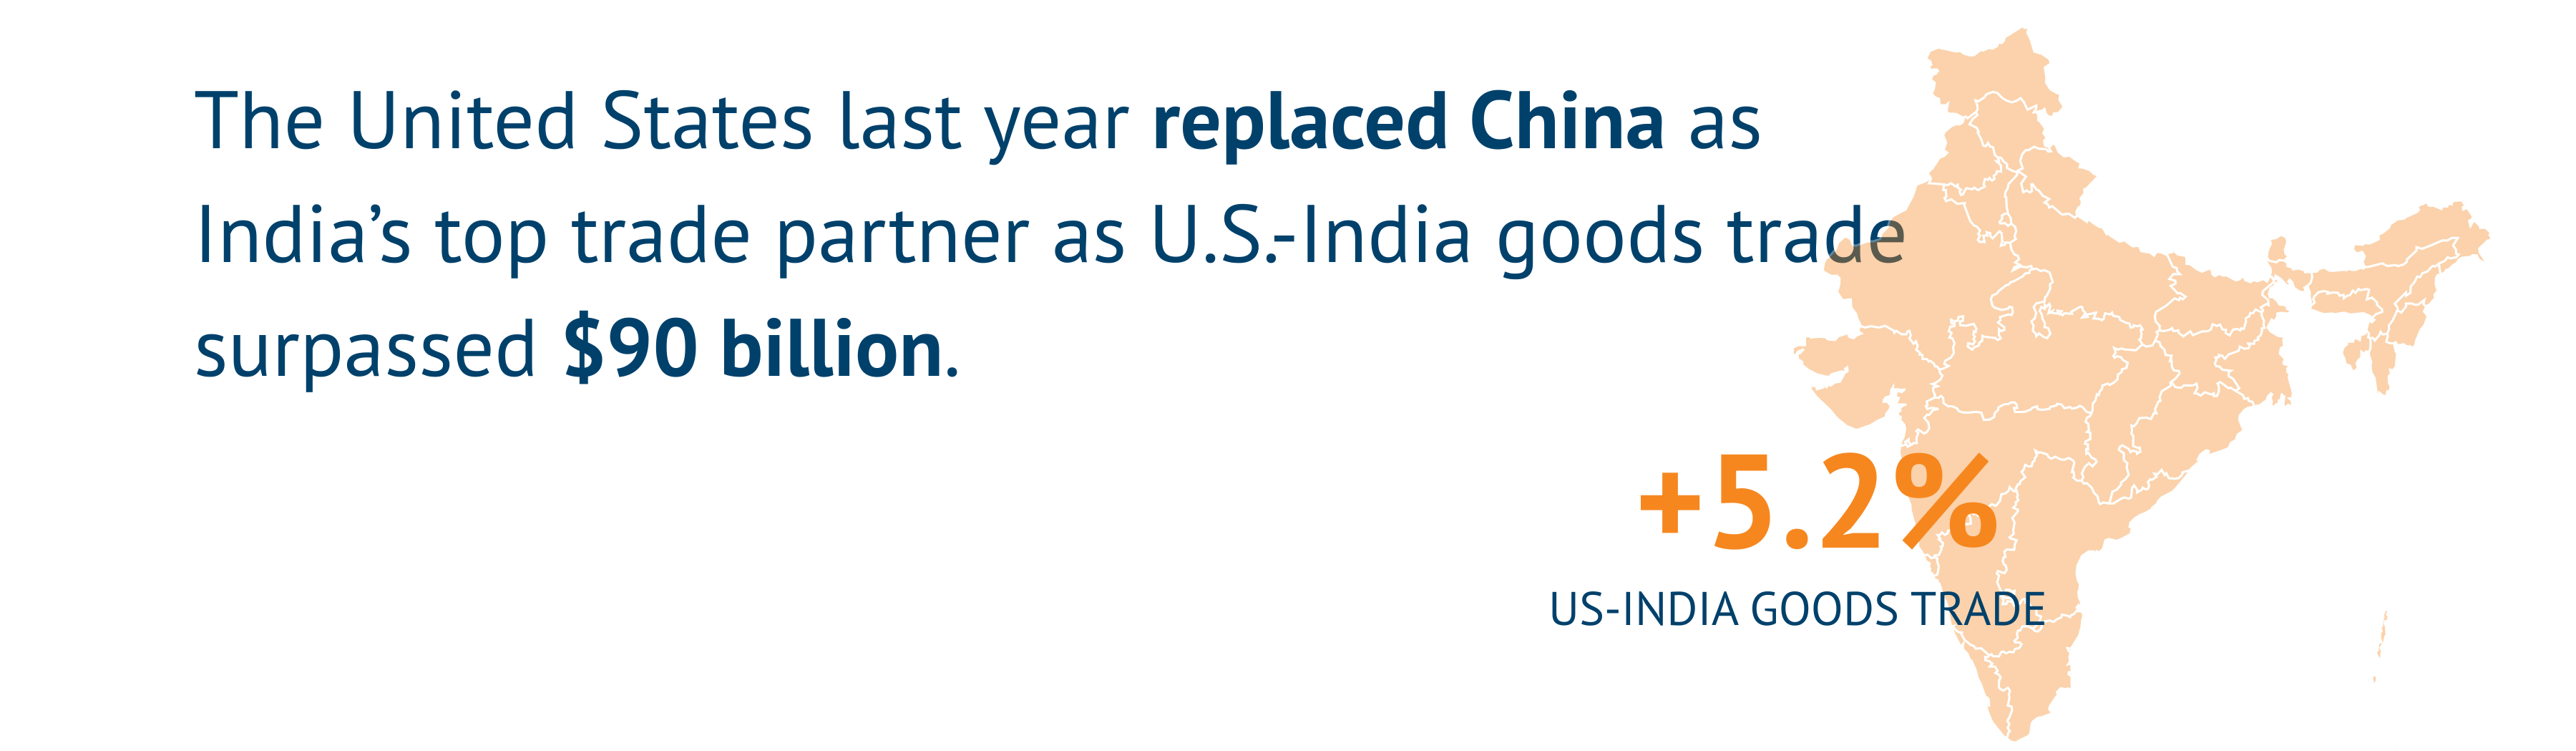 US-India goods trade up